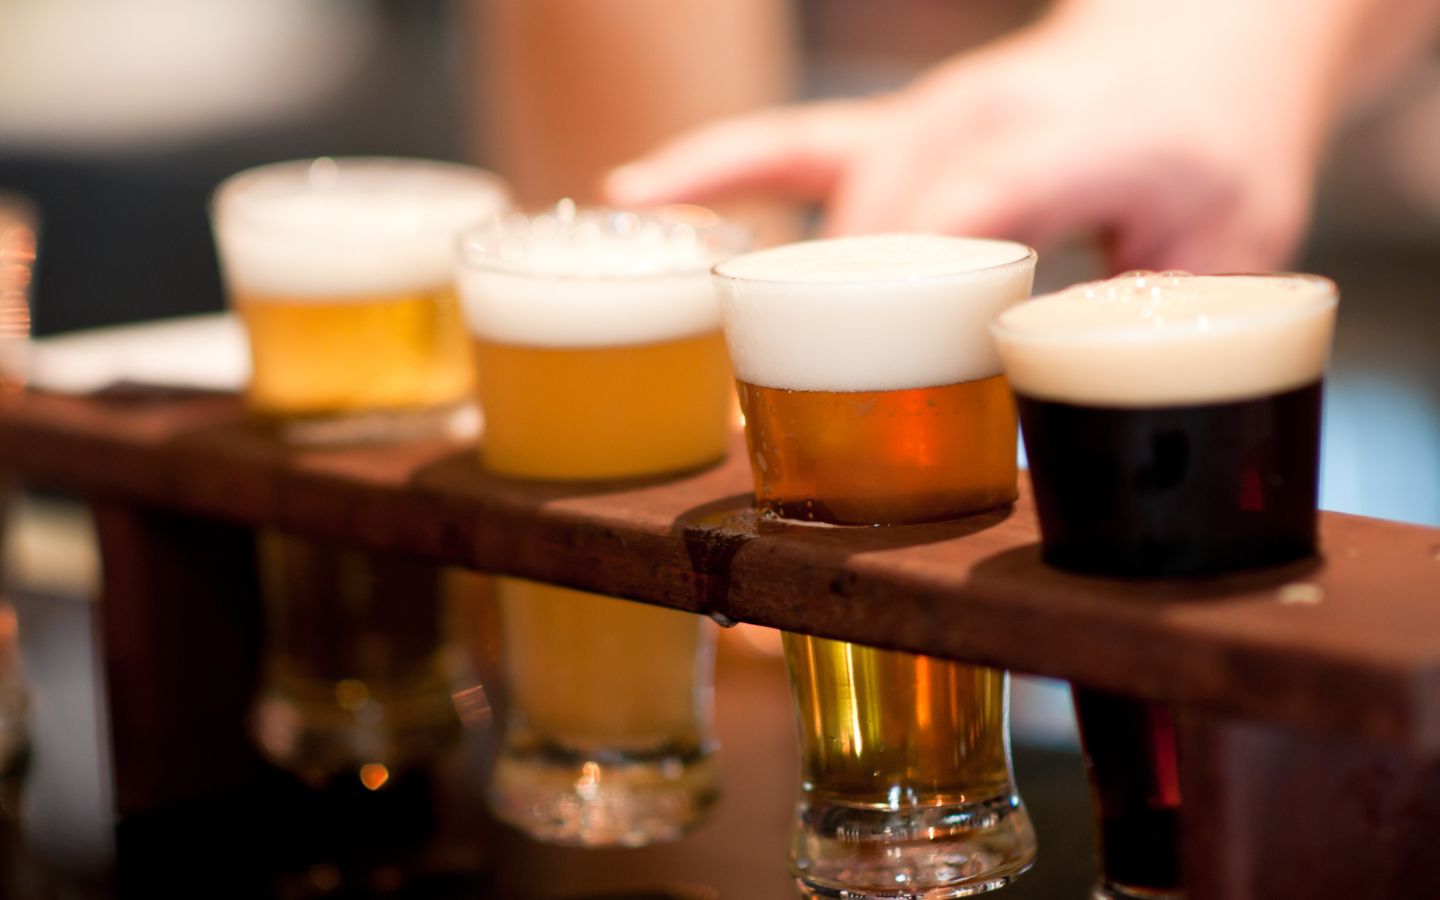 wooden beer sampler with four different beers lined up from lightest to darkest left to right and a hand reaching for the sampler in the background